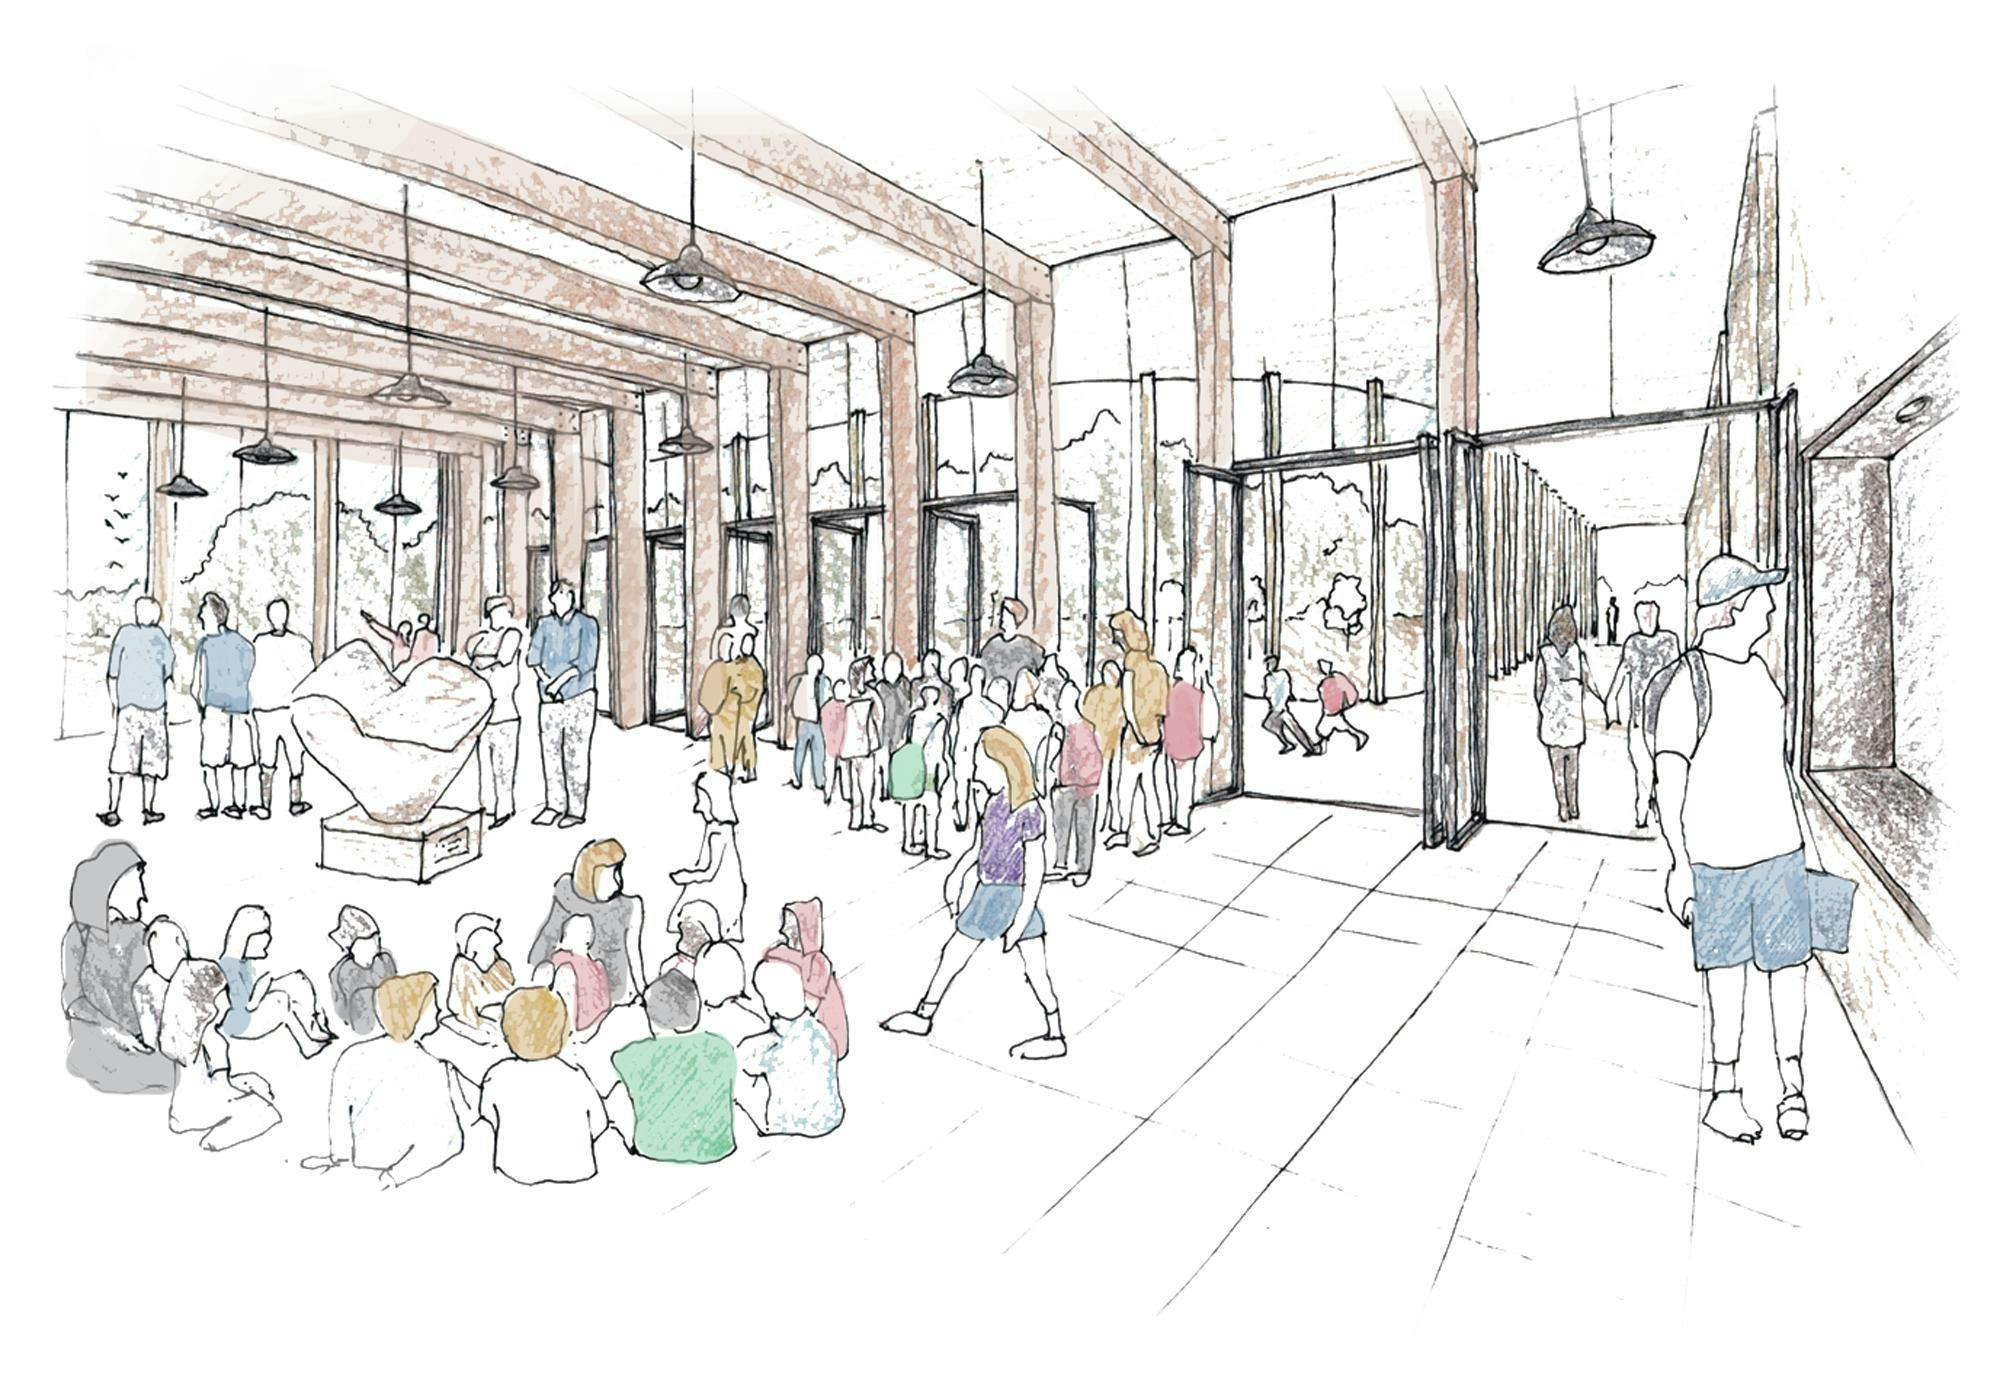 Sketch of internal view of proposed visitor hub with children and members of the public